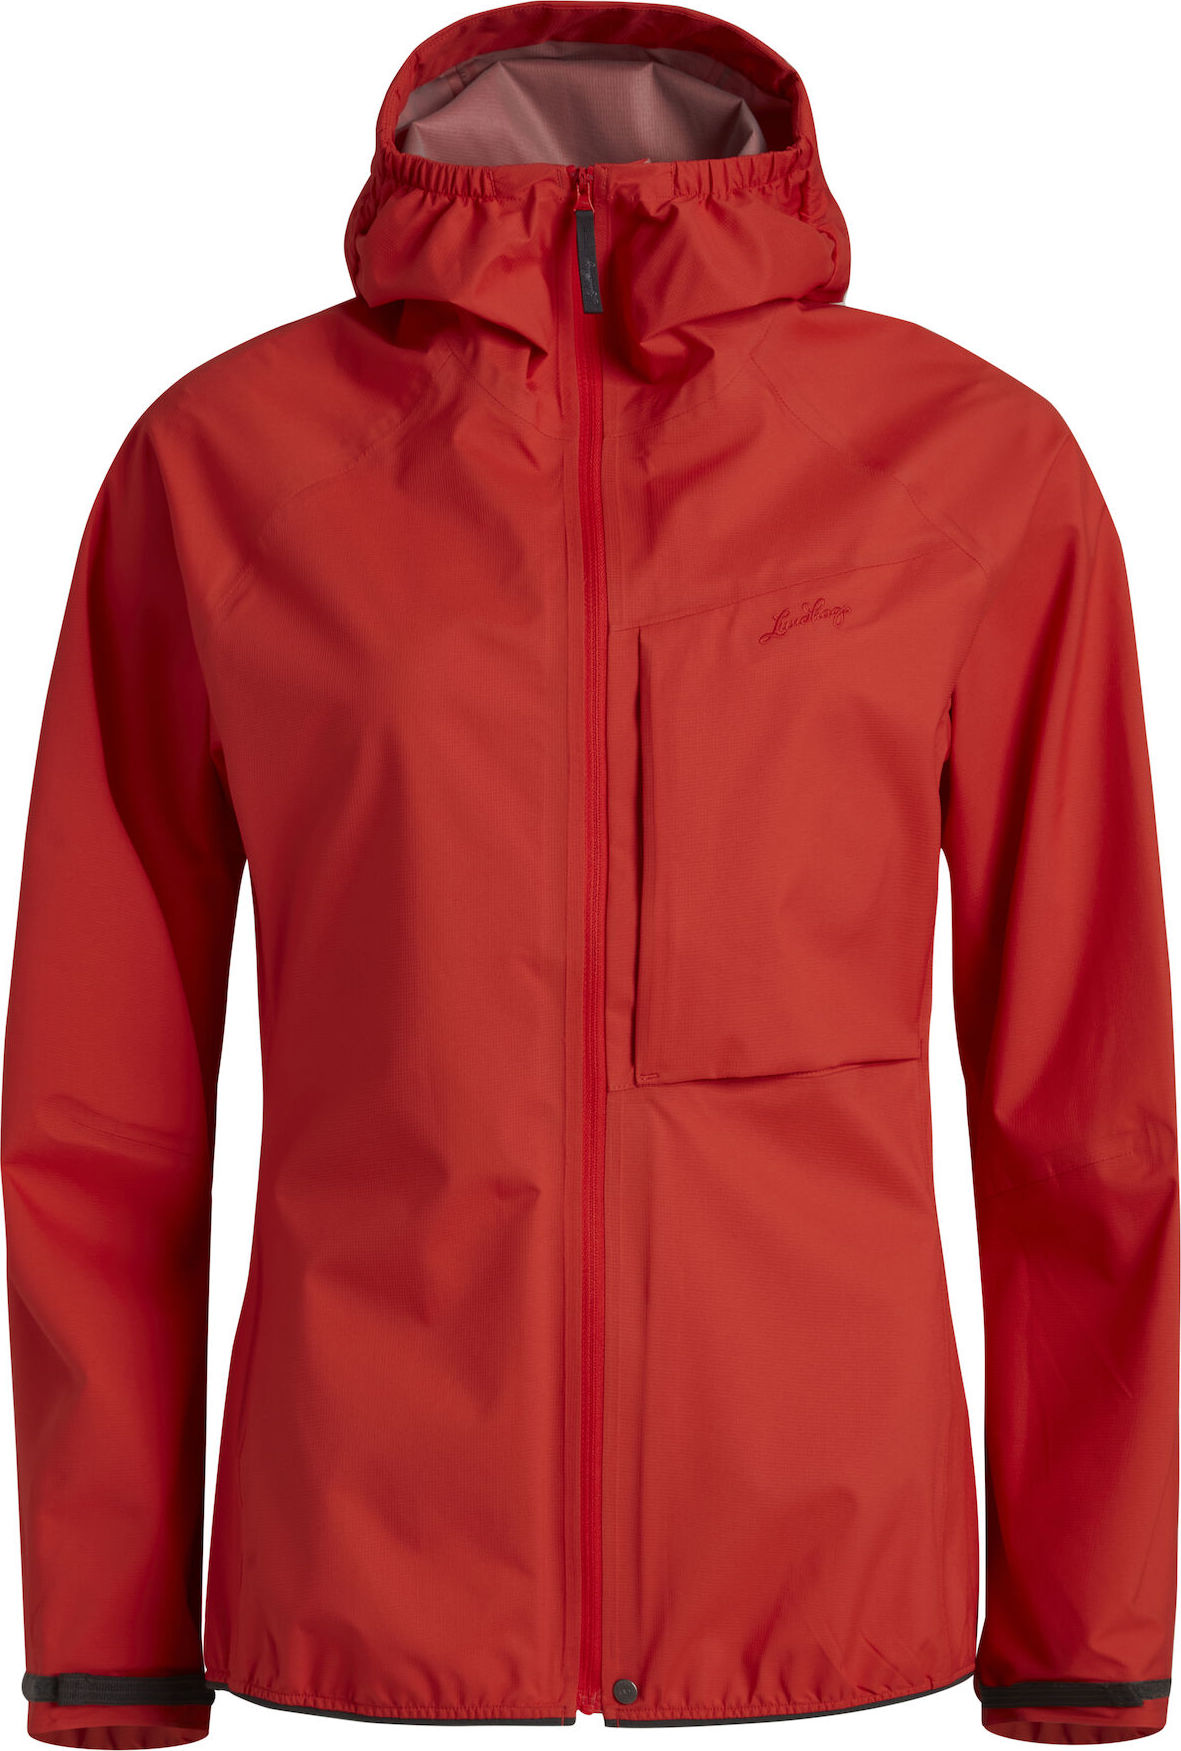 Lundhags Women’s Lo Jacket Lively Red